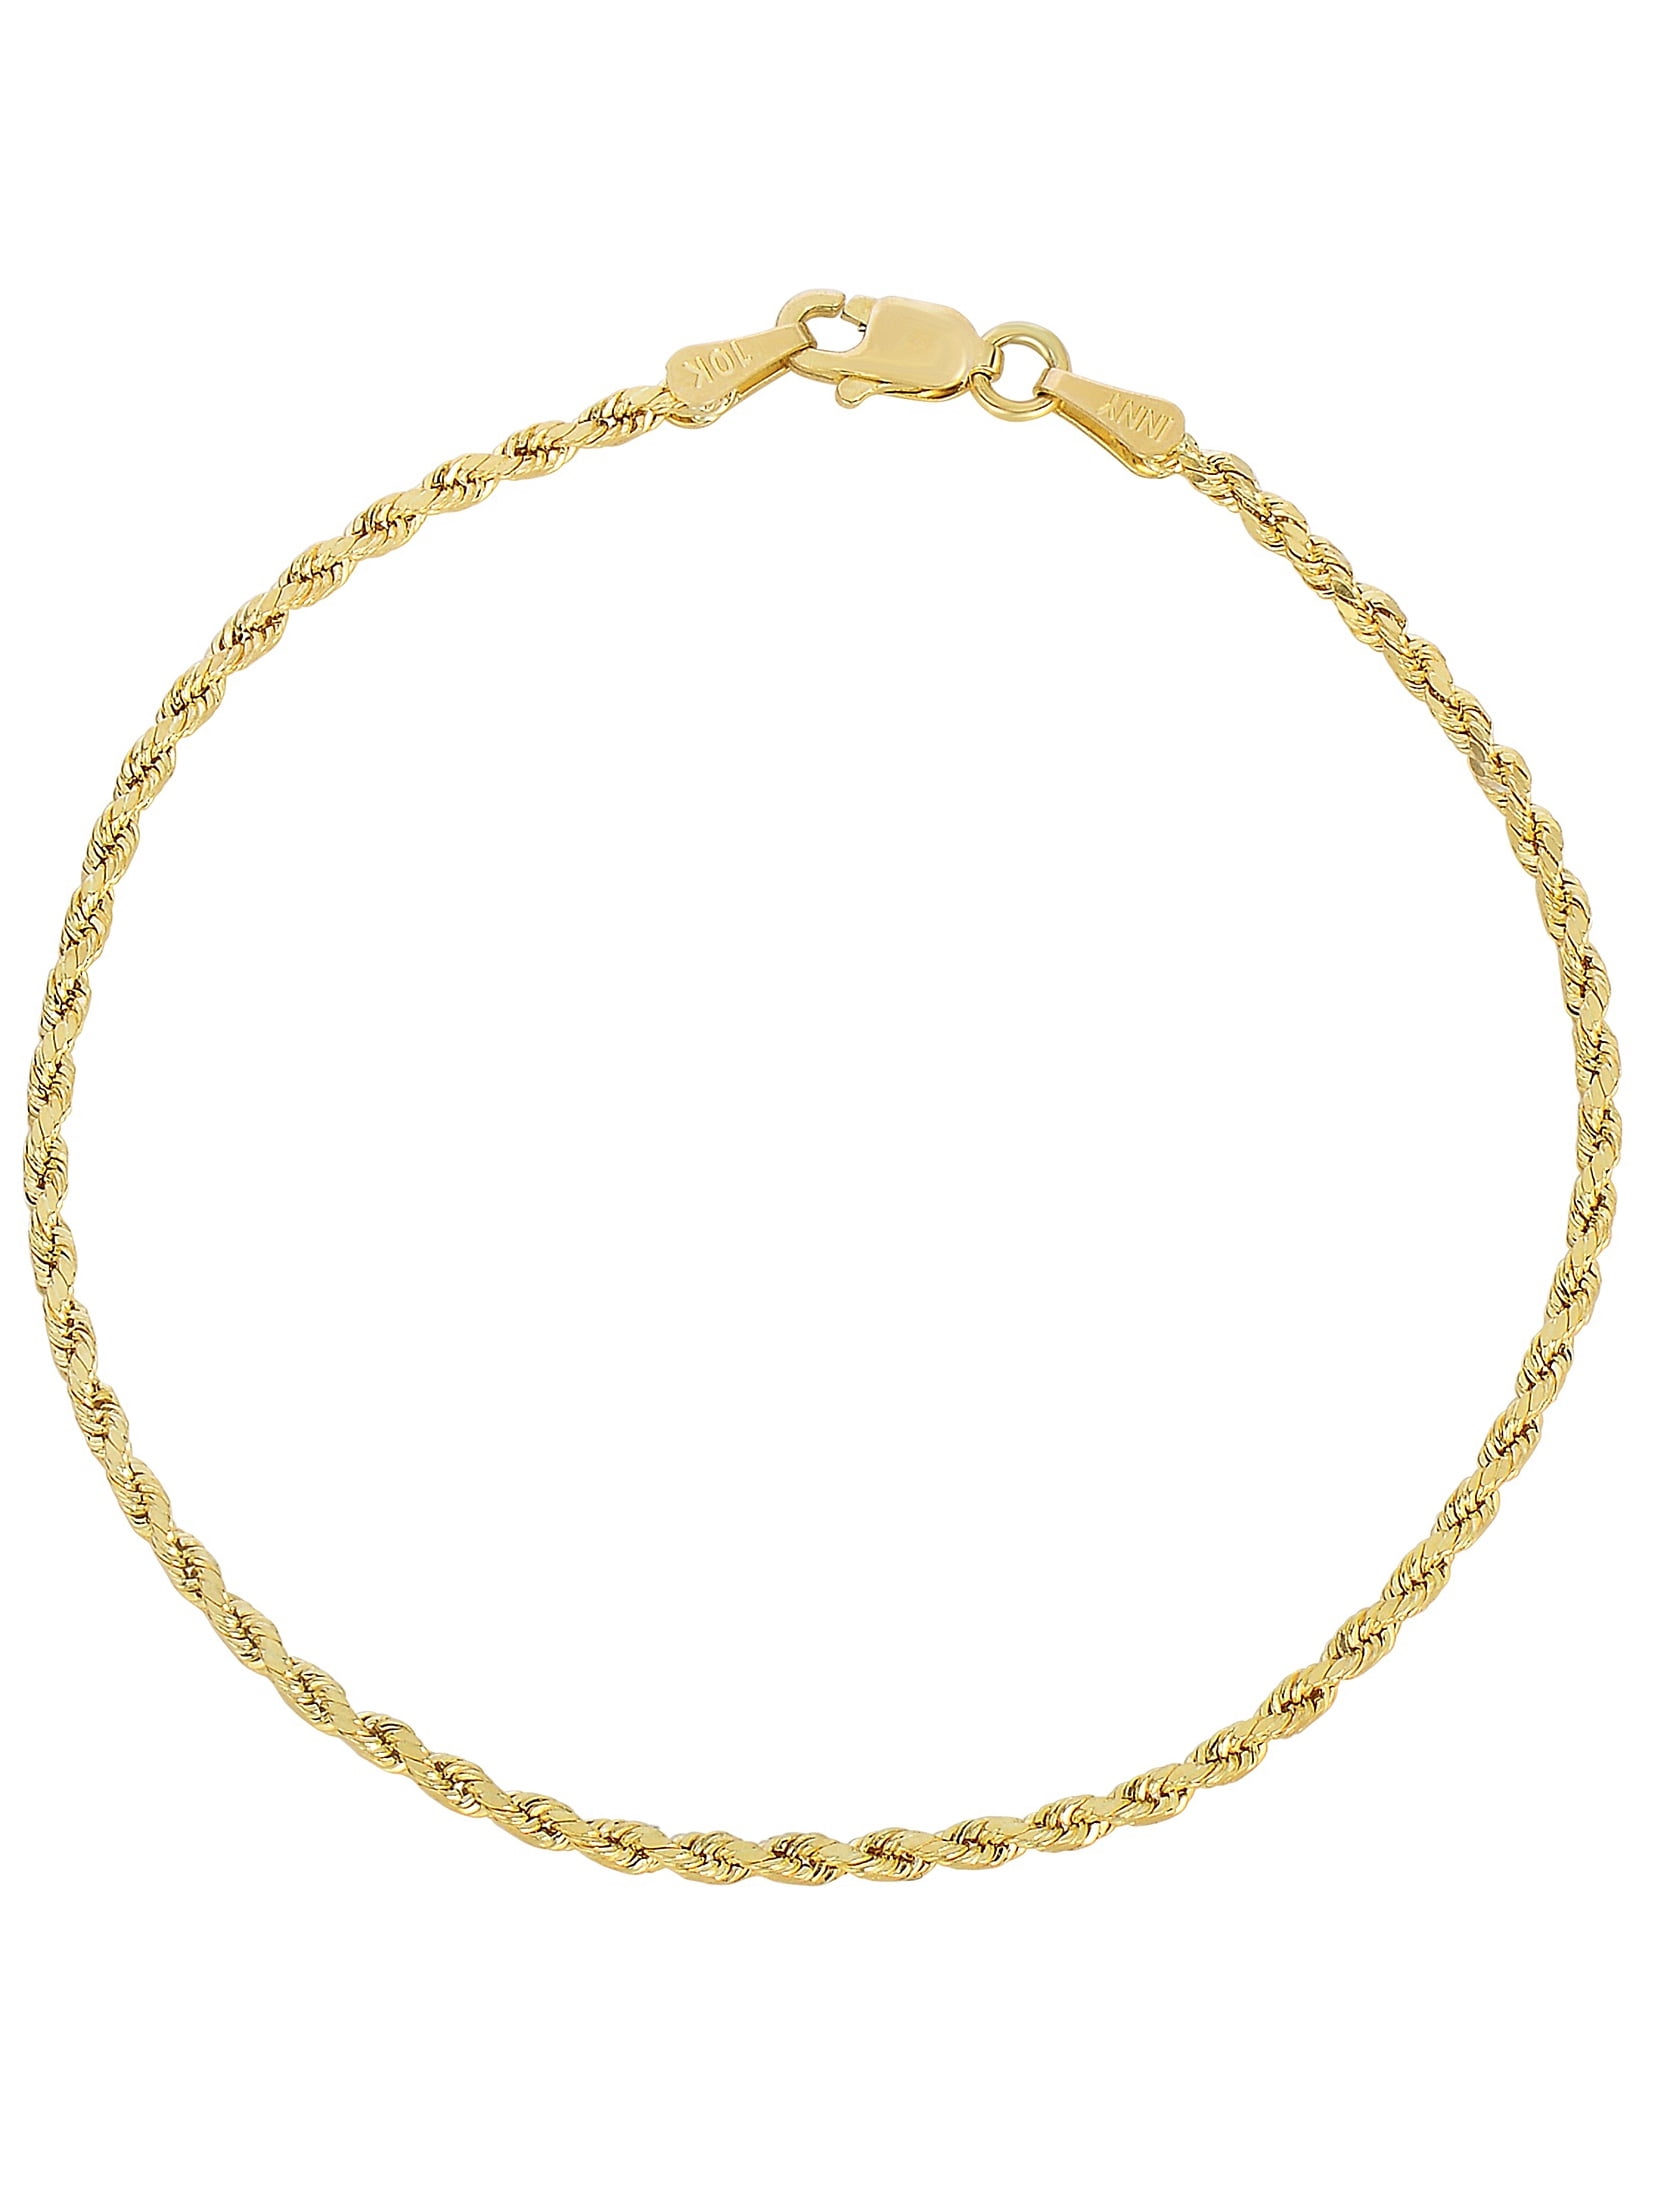 Floreo 10k Yellow Gold Solid Extra Light Diamond Cut Rope Chain Bracelet and Anklet for Men and Women 1.5mm